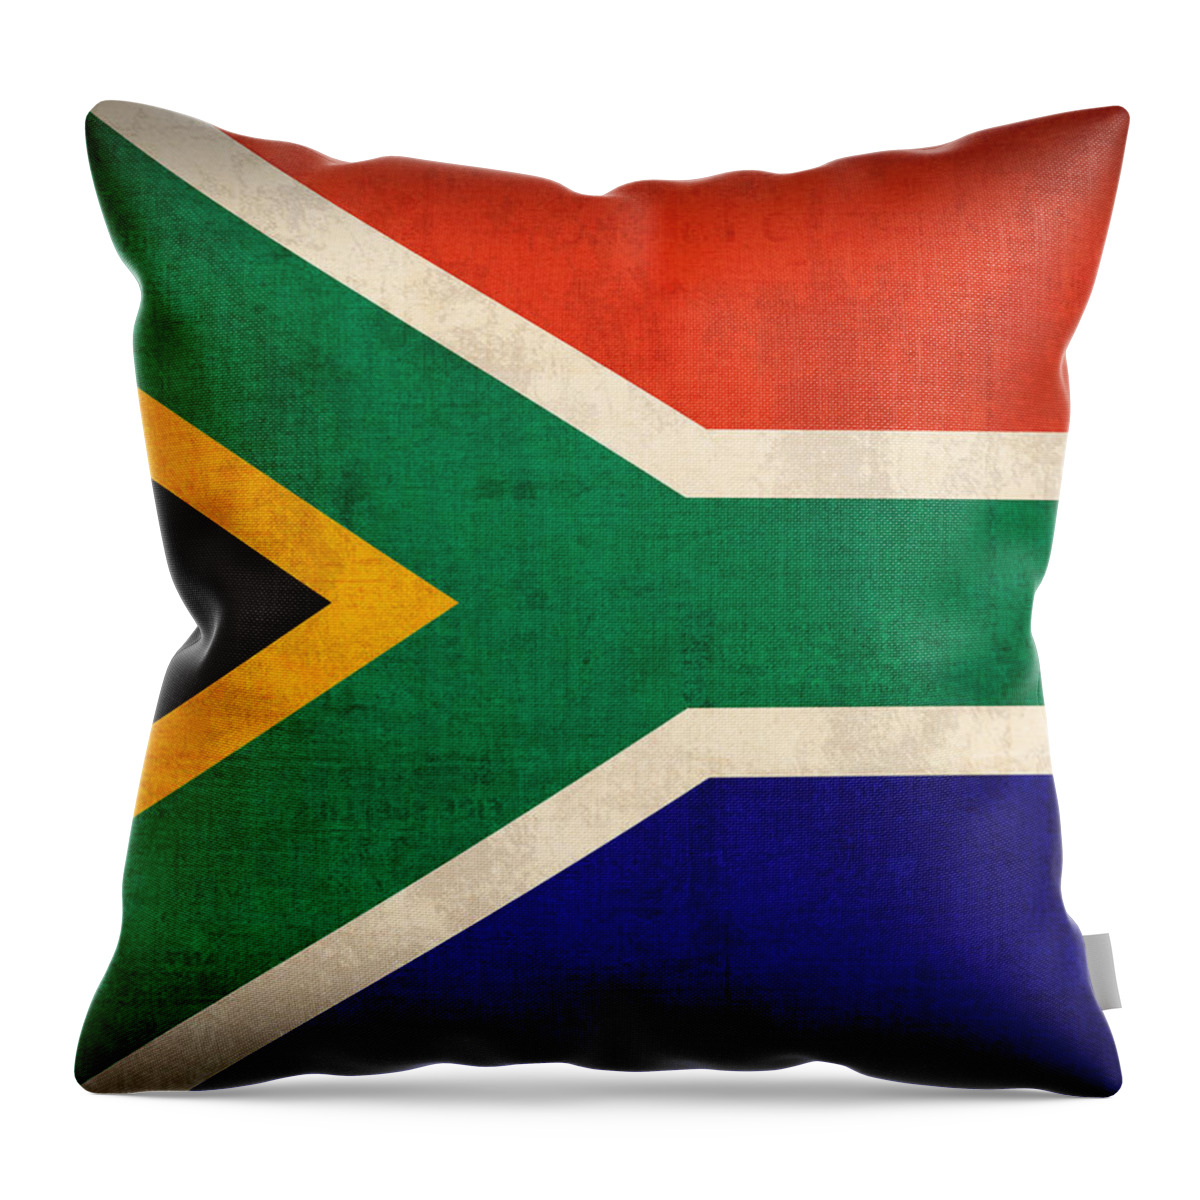 South Africa Flag Vintage Distressed Finish Throw Pillow featuring the mixed media South Africa Flag Vintage Distressed Finish by Design Turnpike